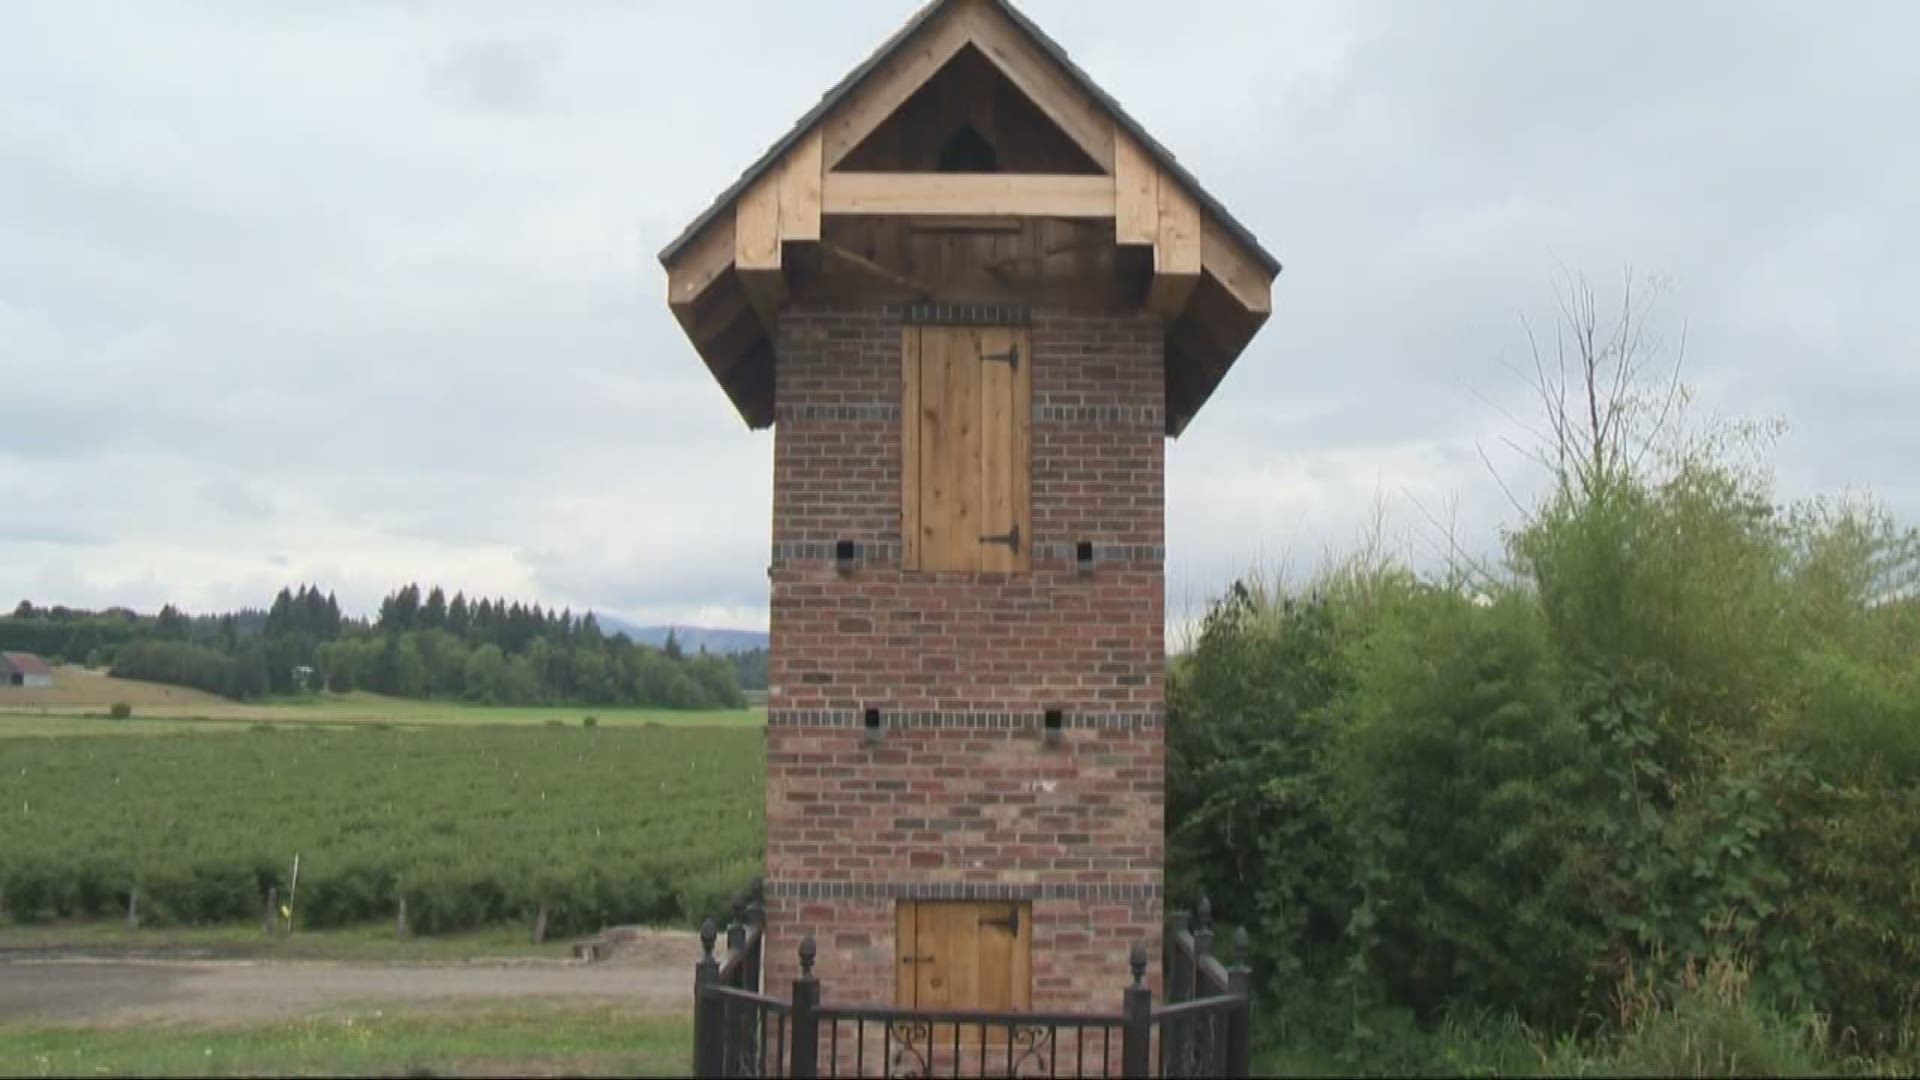 A special house for the birds. Take a look at this special structure.